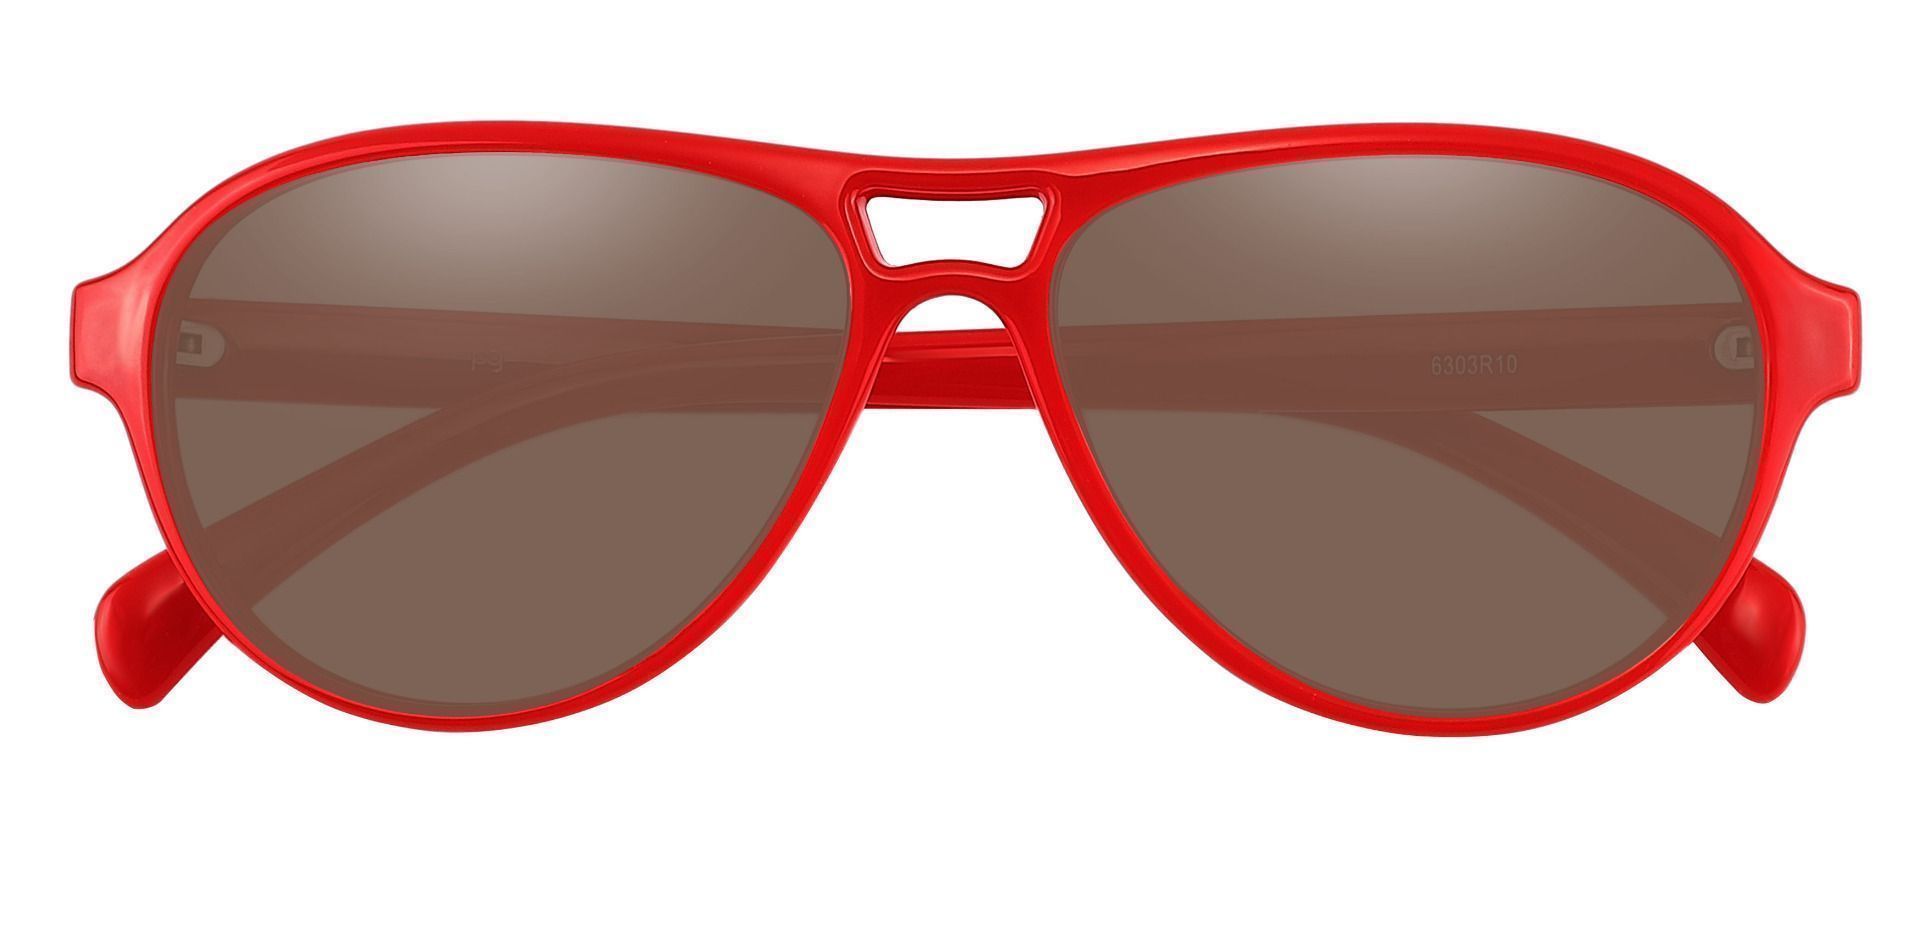 Sosa Aviator Lined Bifocal Sunglasses - Red Frame With Brown Lenses